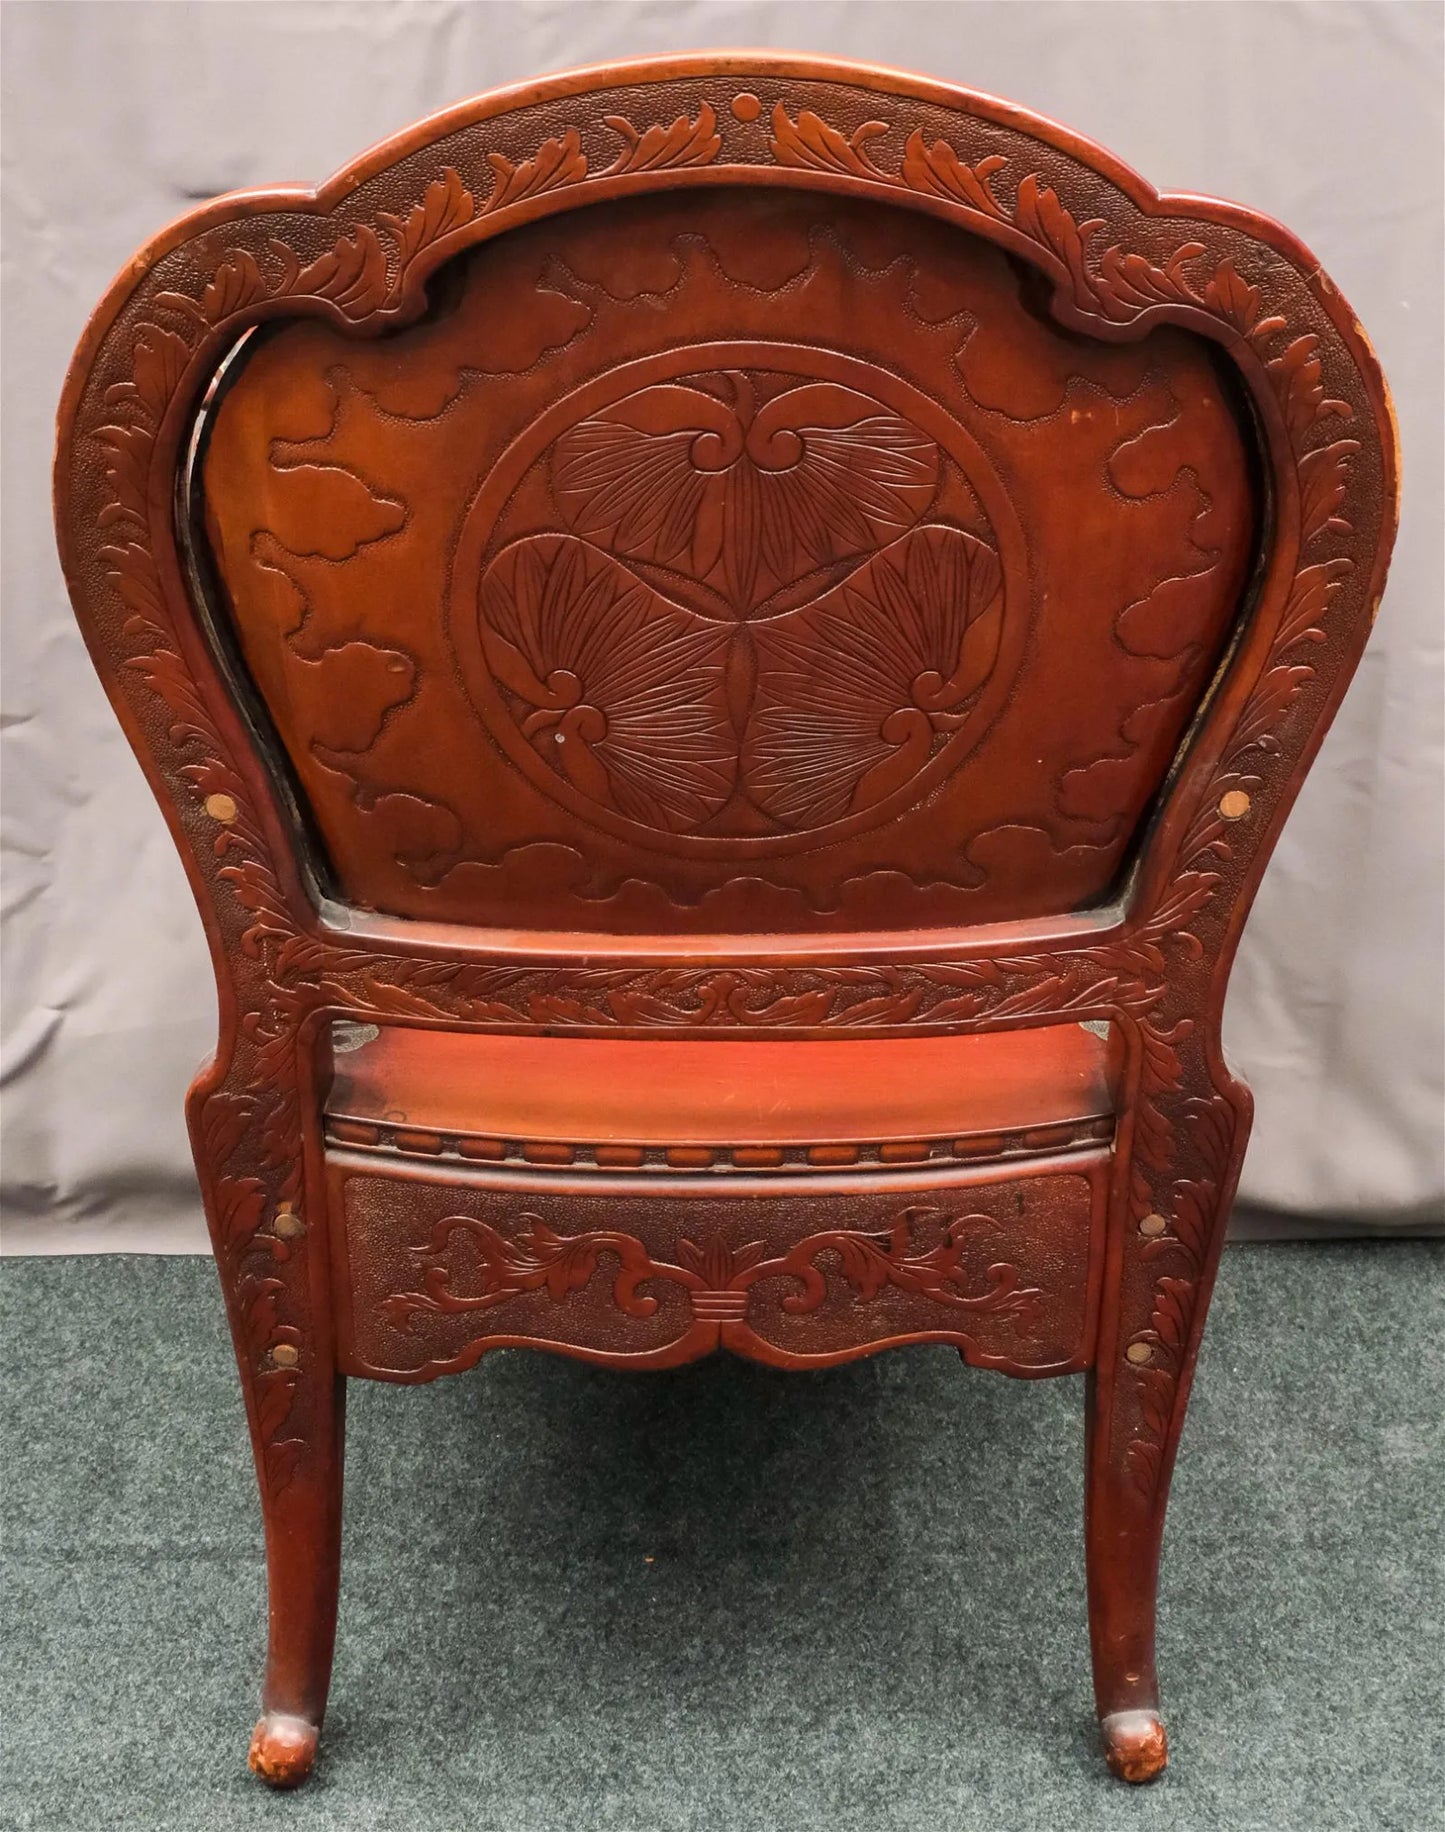 Antique Carved Rosewood Dragon Chair